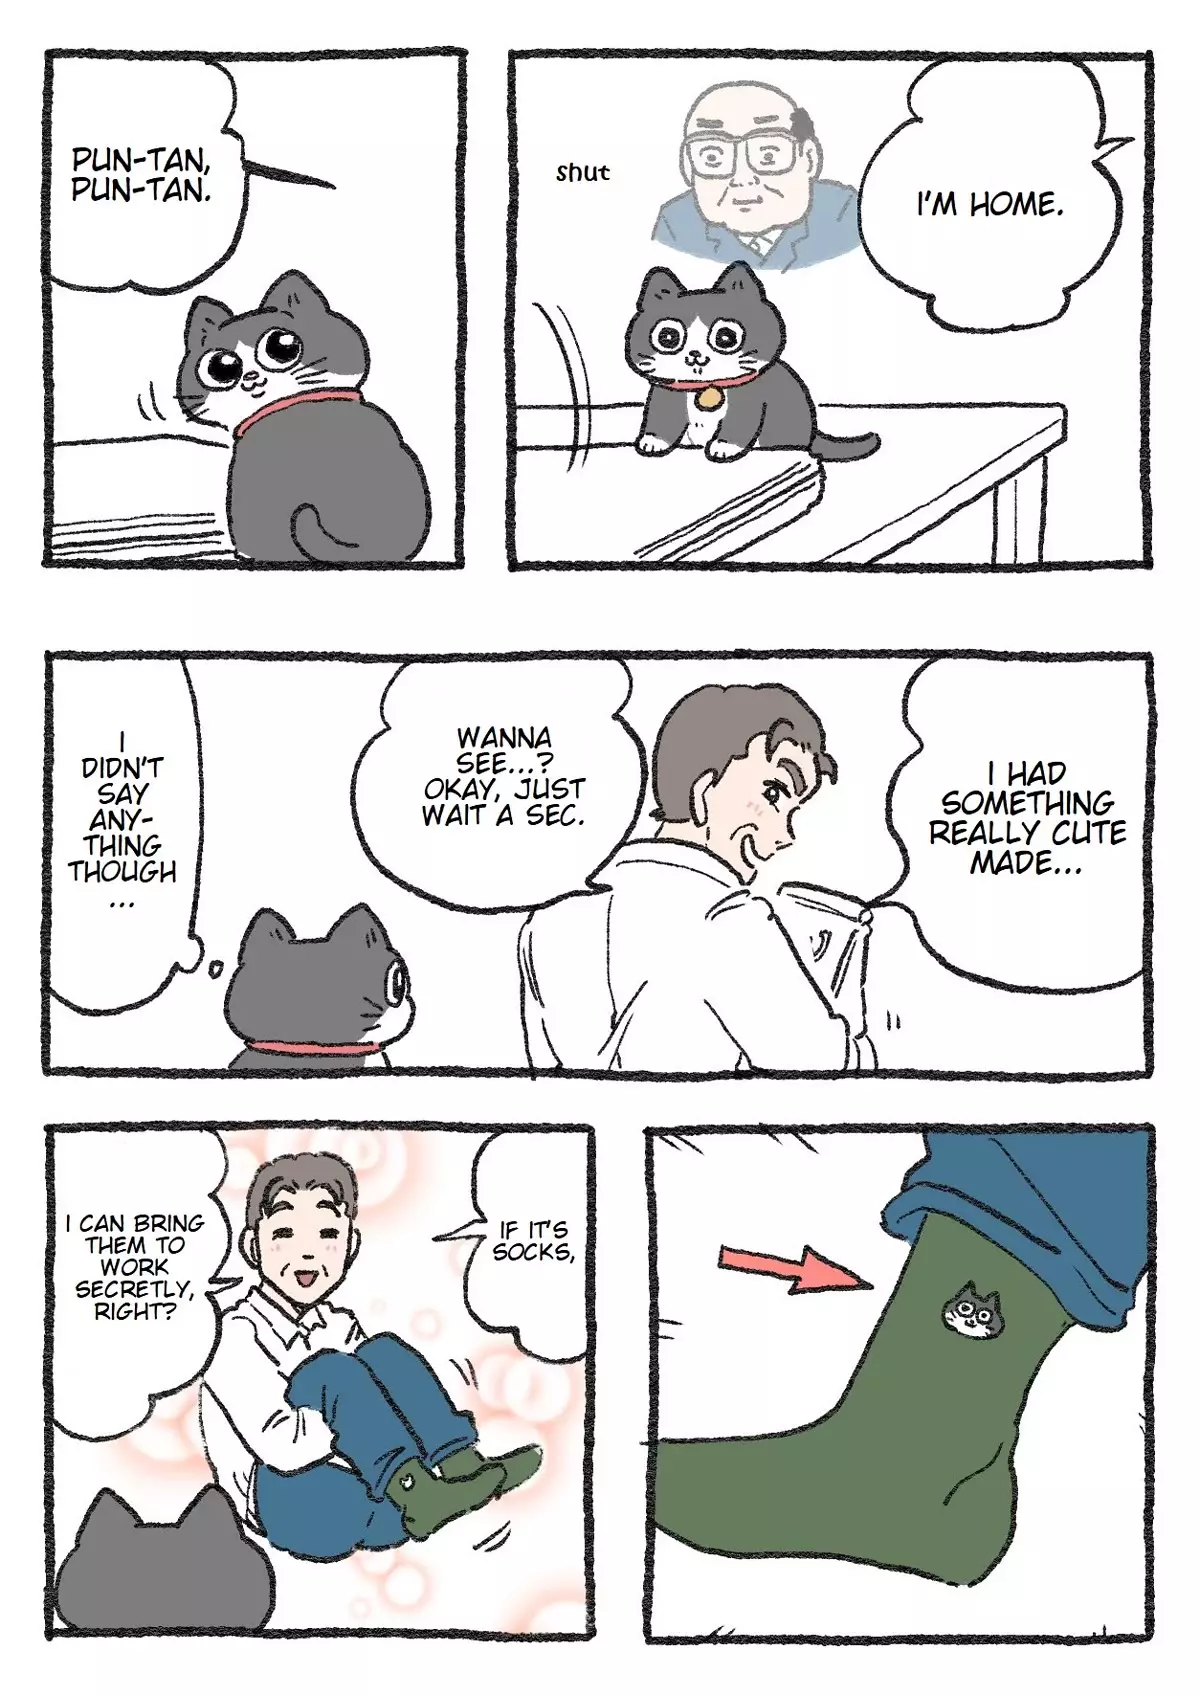 The Old Man Who Was Reincarnated As A Cat - 138 page 1-f647fbc7